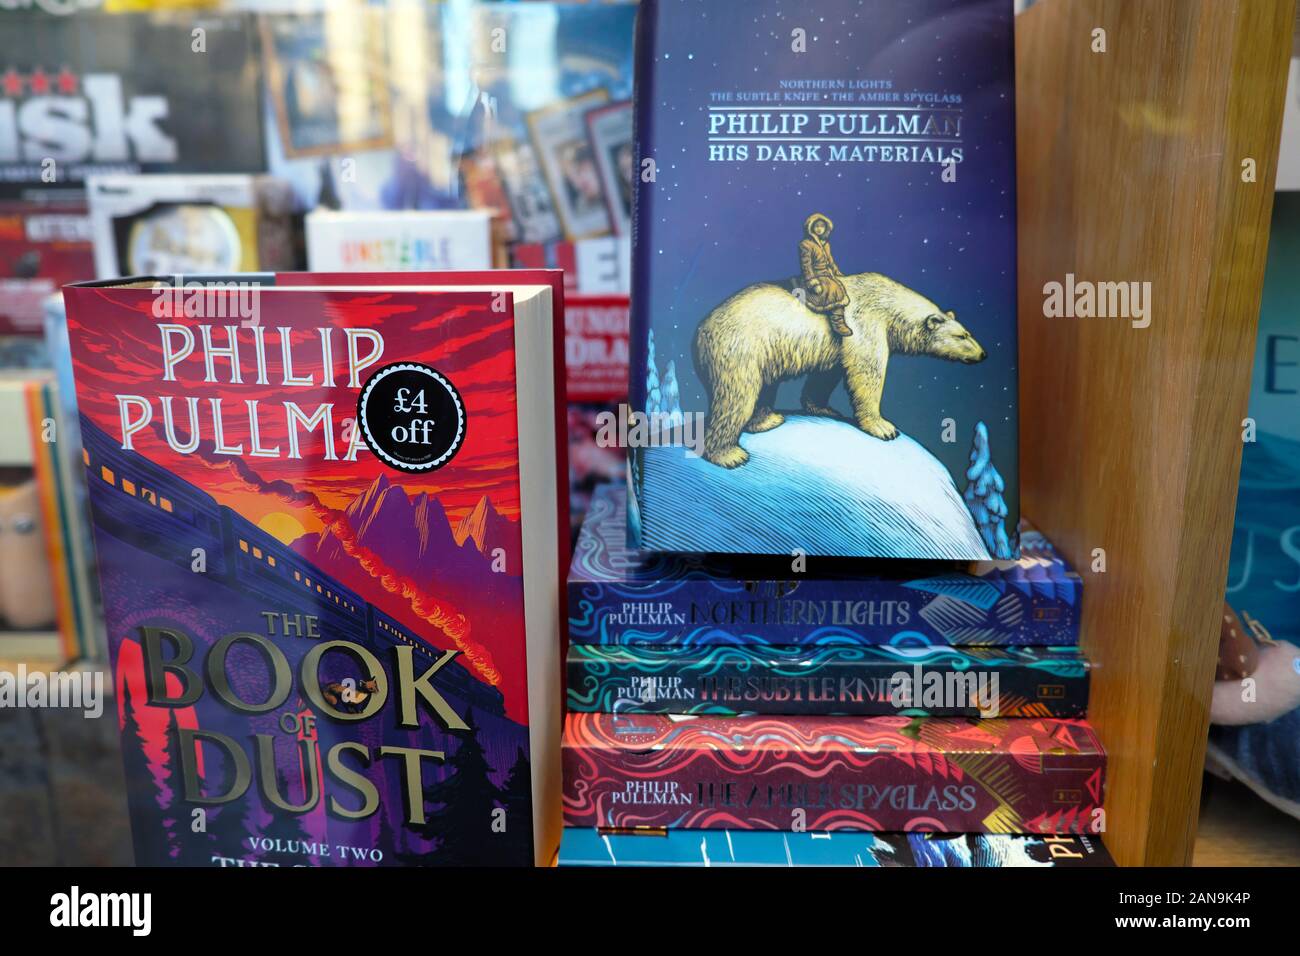 Philip Pullman The Book of Dust book front cover & His Dark Materials in Waterstones bookstore window display in 2019 London England UK  KATHY DEWITT Stock Photo